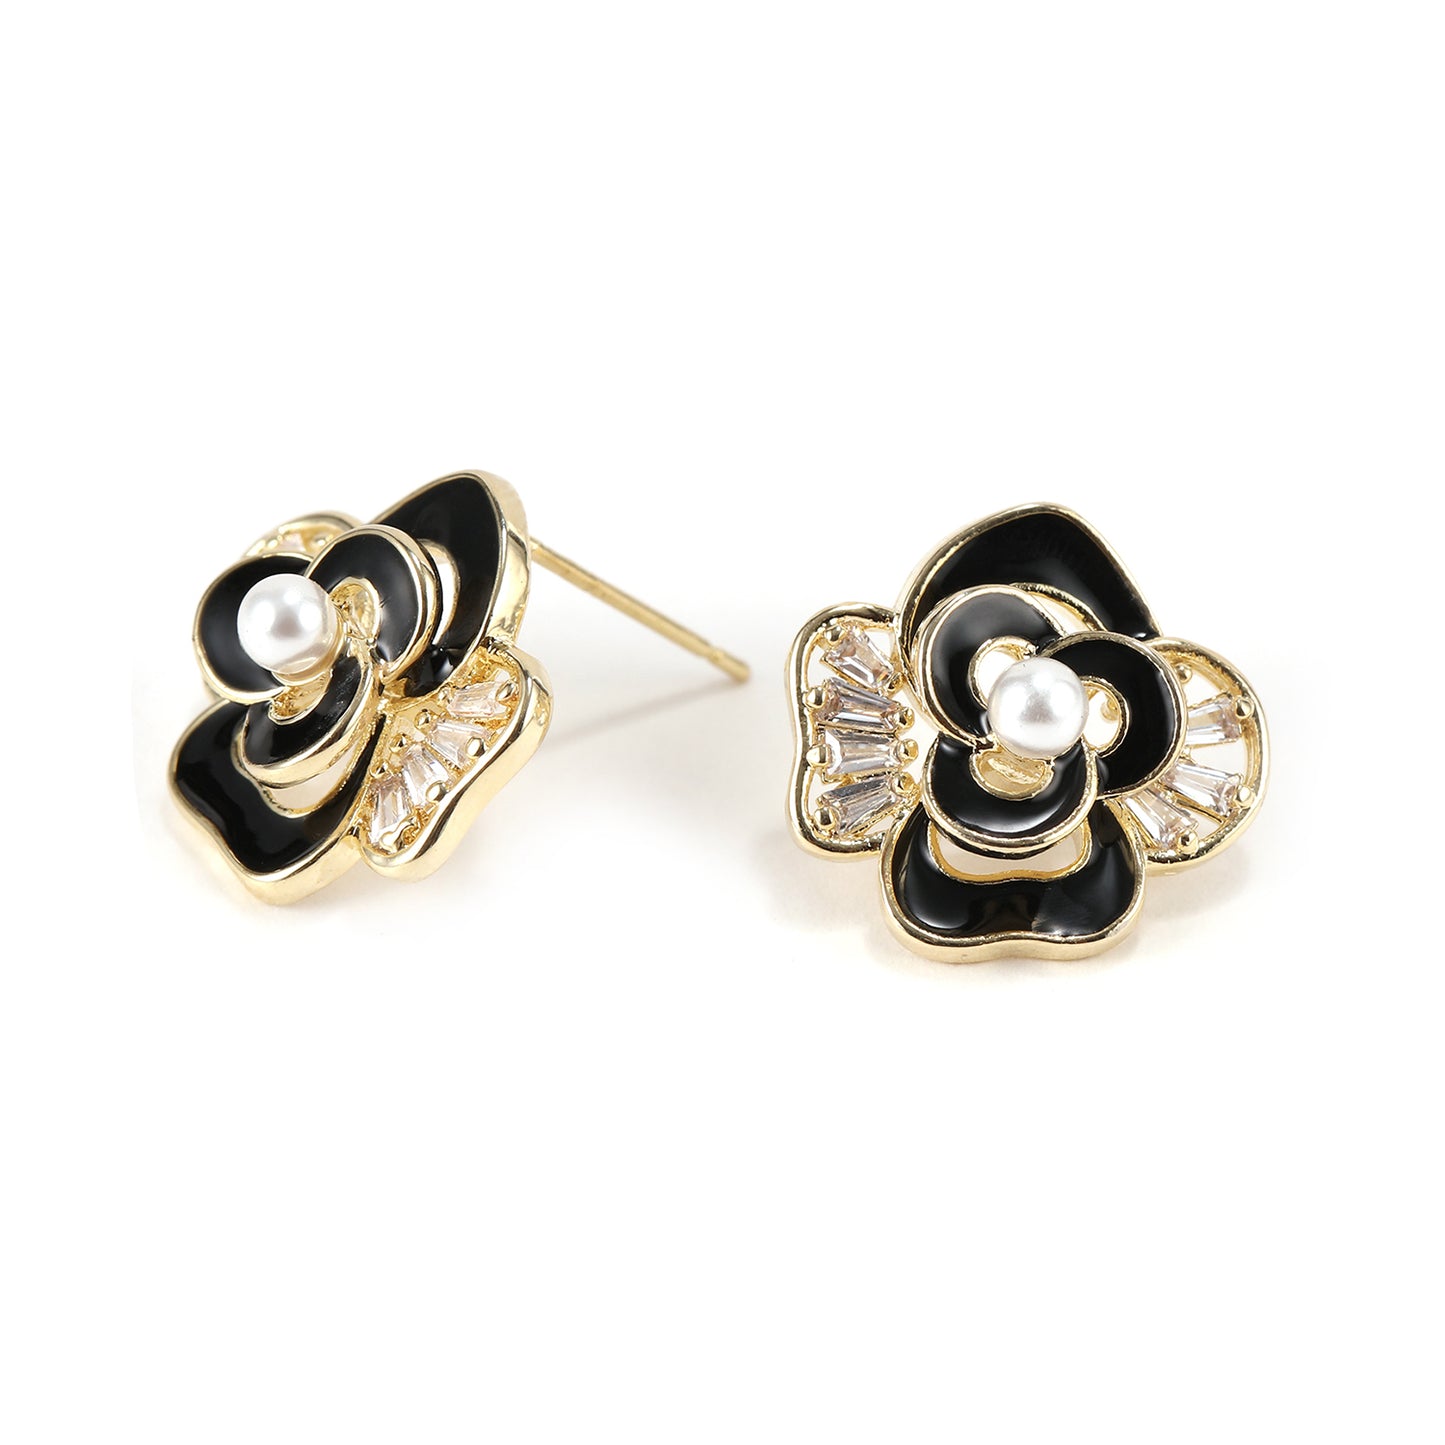 French Enamel Black and Gold Statement Flower Studs with Pearl